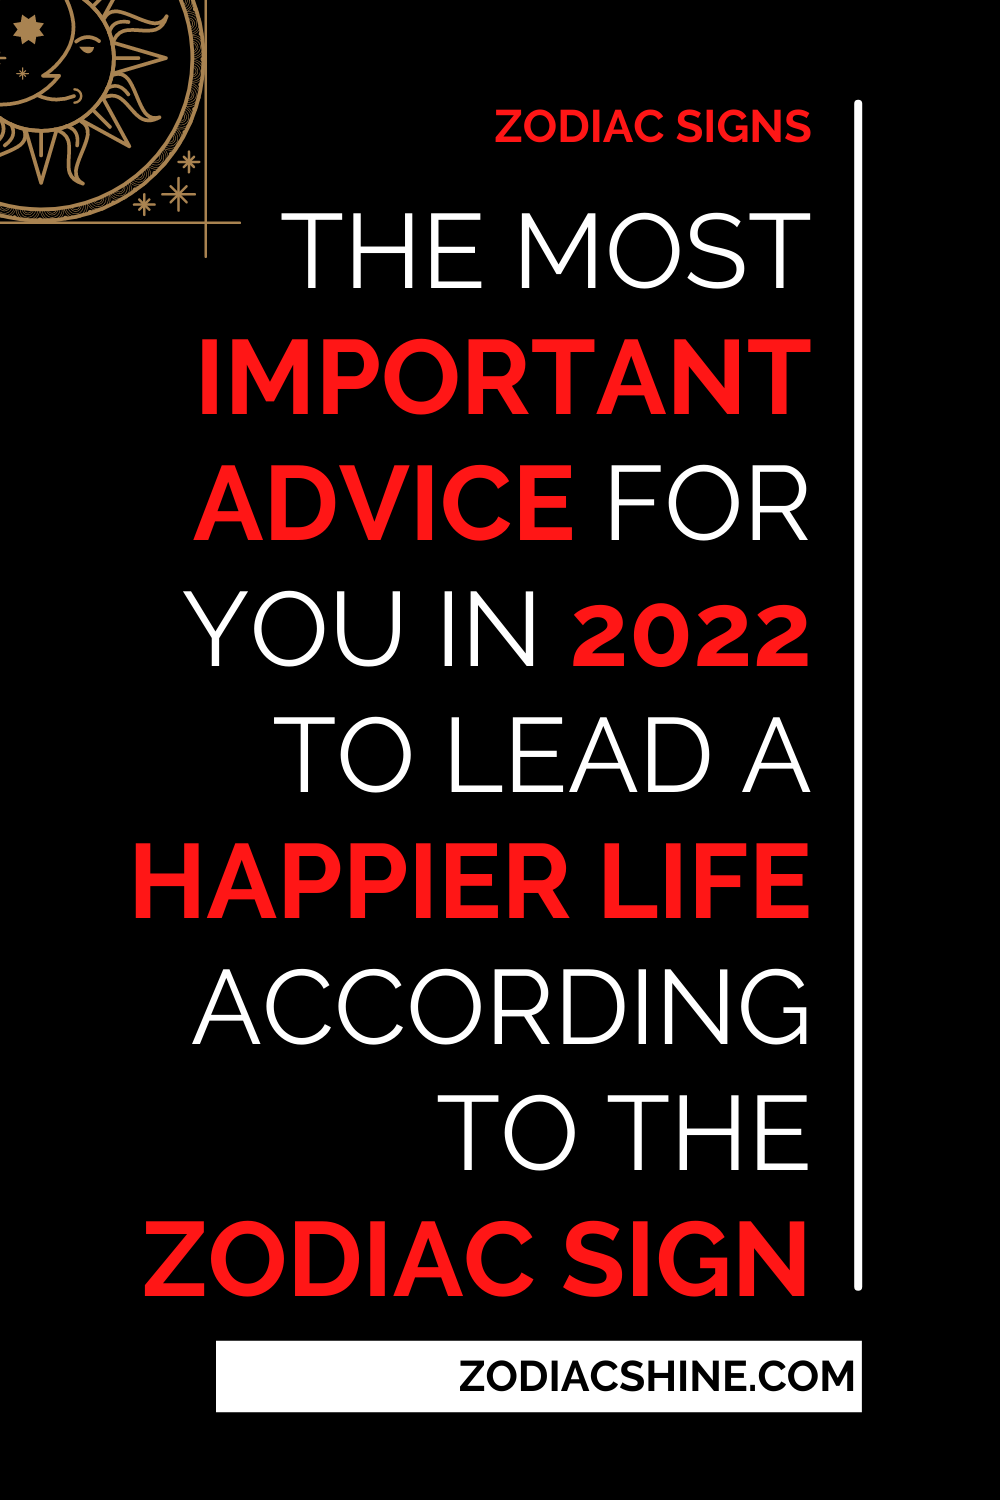 The Most Important Advice For You In 2022 To Lead A Happier Life According To The Zodiac Sign